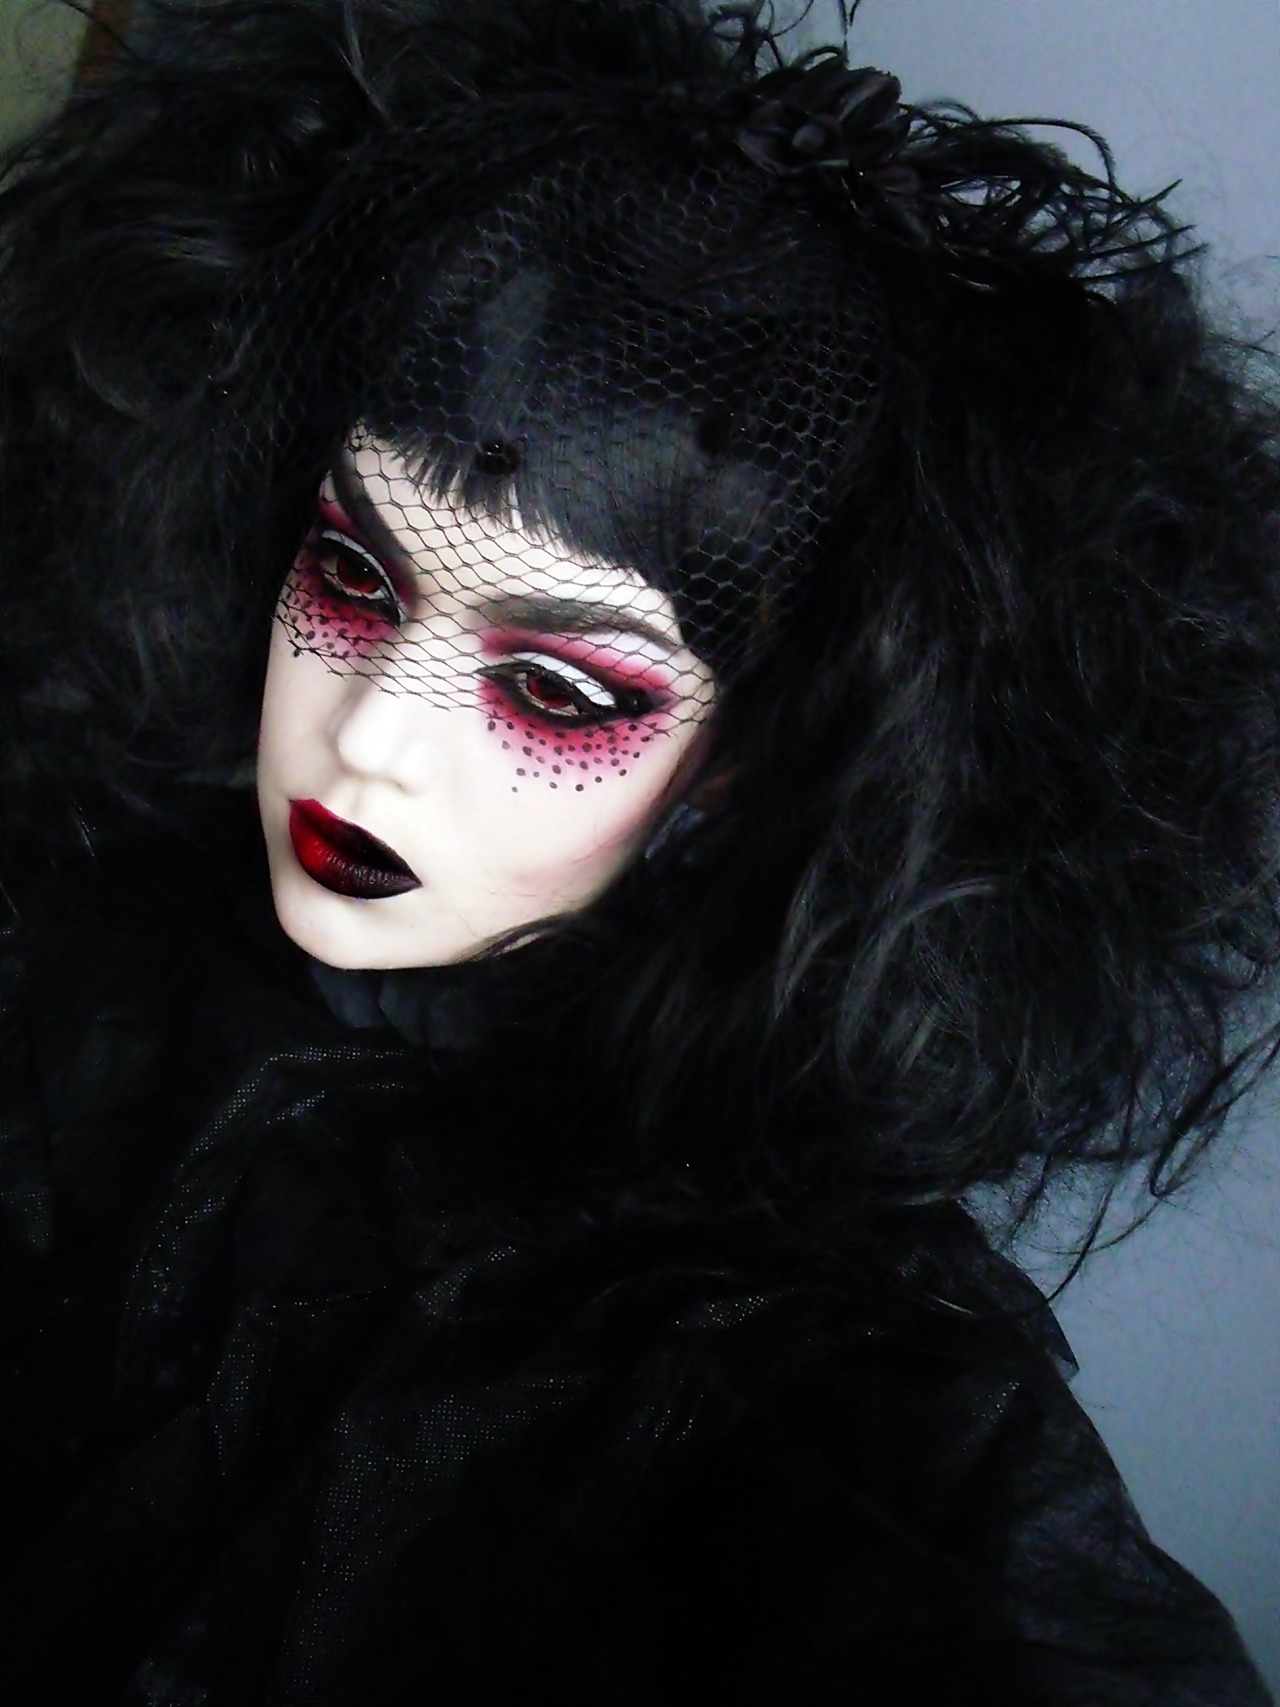 noble-of-shadows: 12.23.15 I have not felt the... - Gothic and Amazing